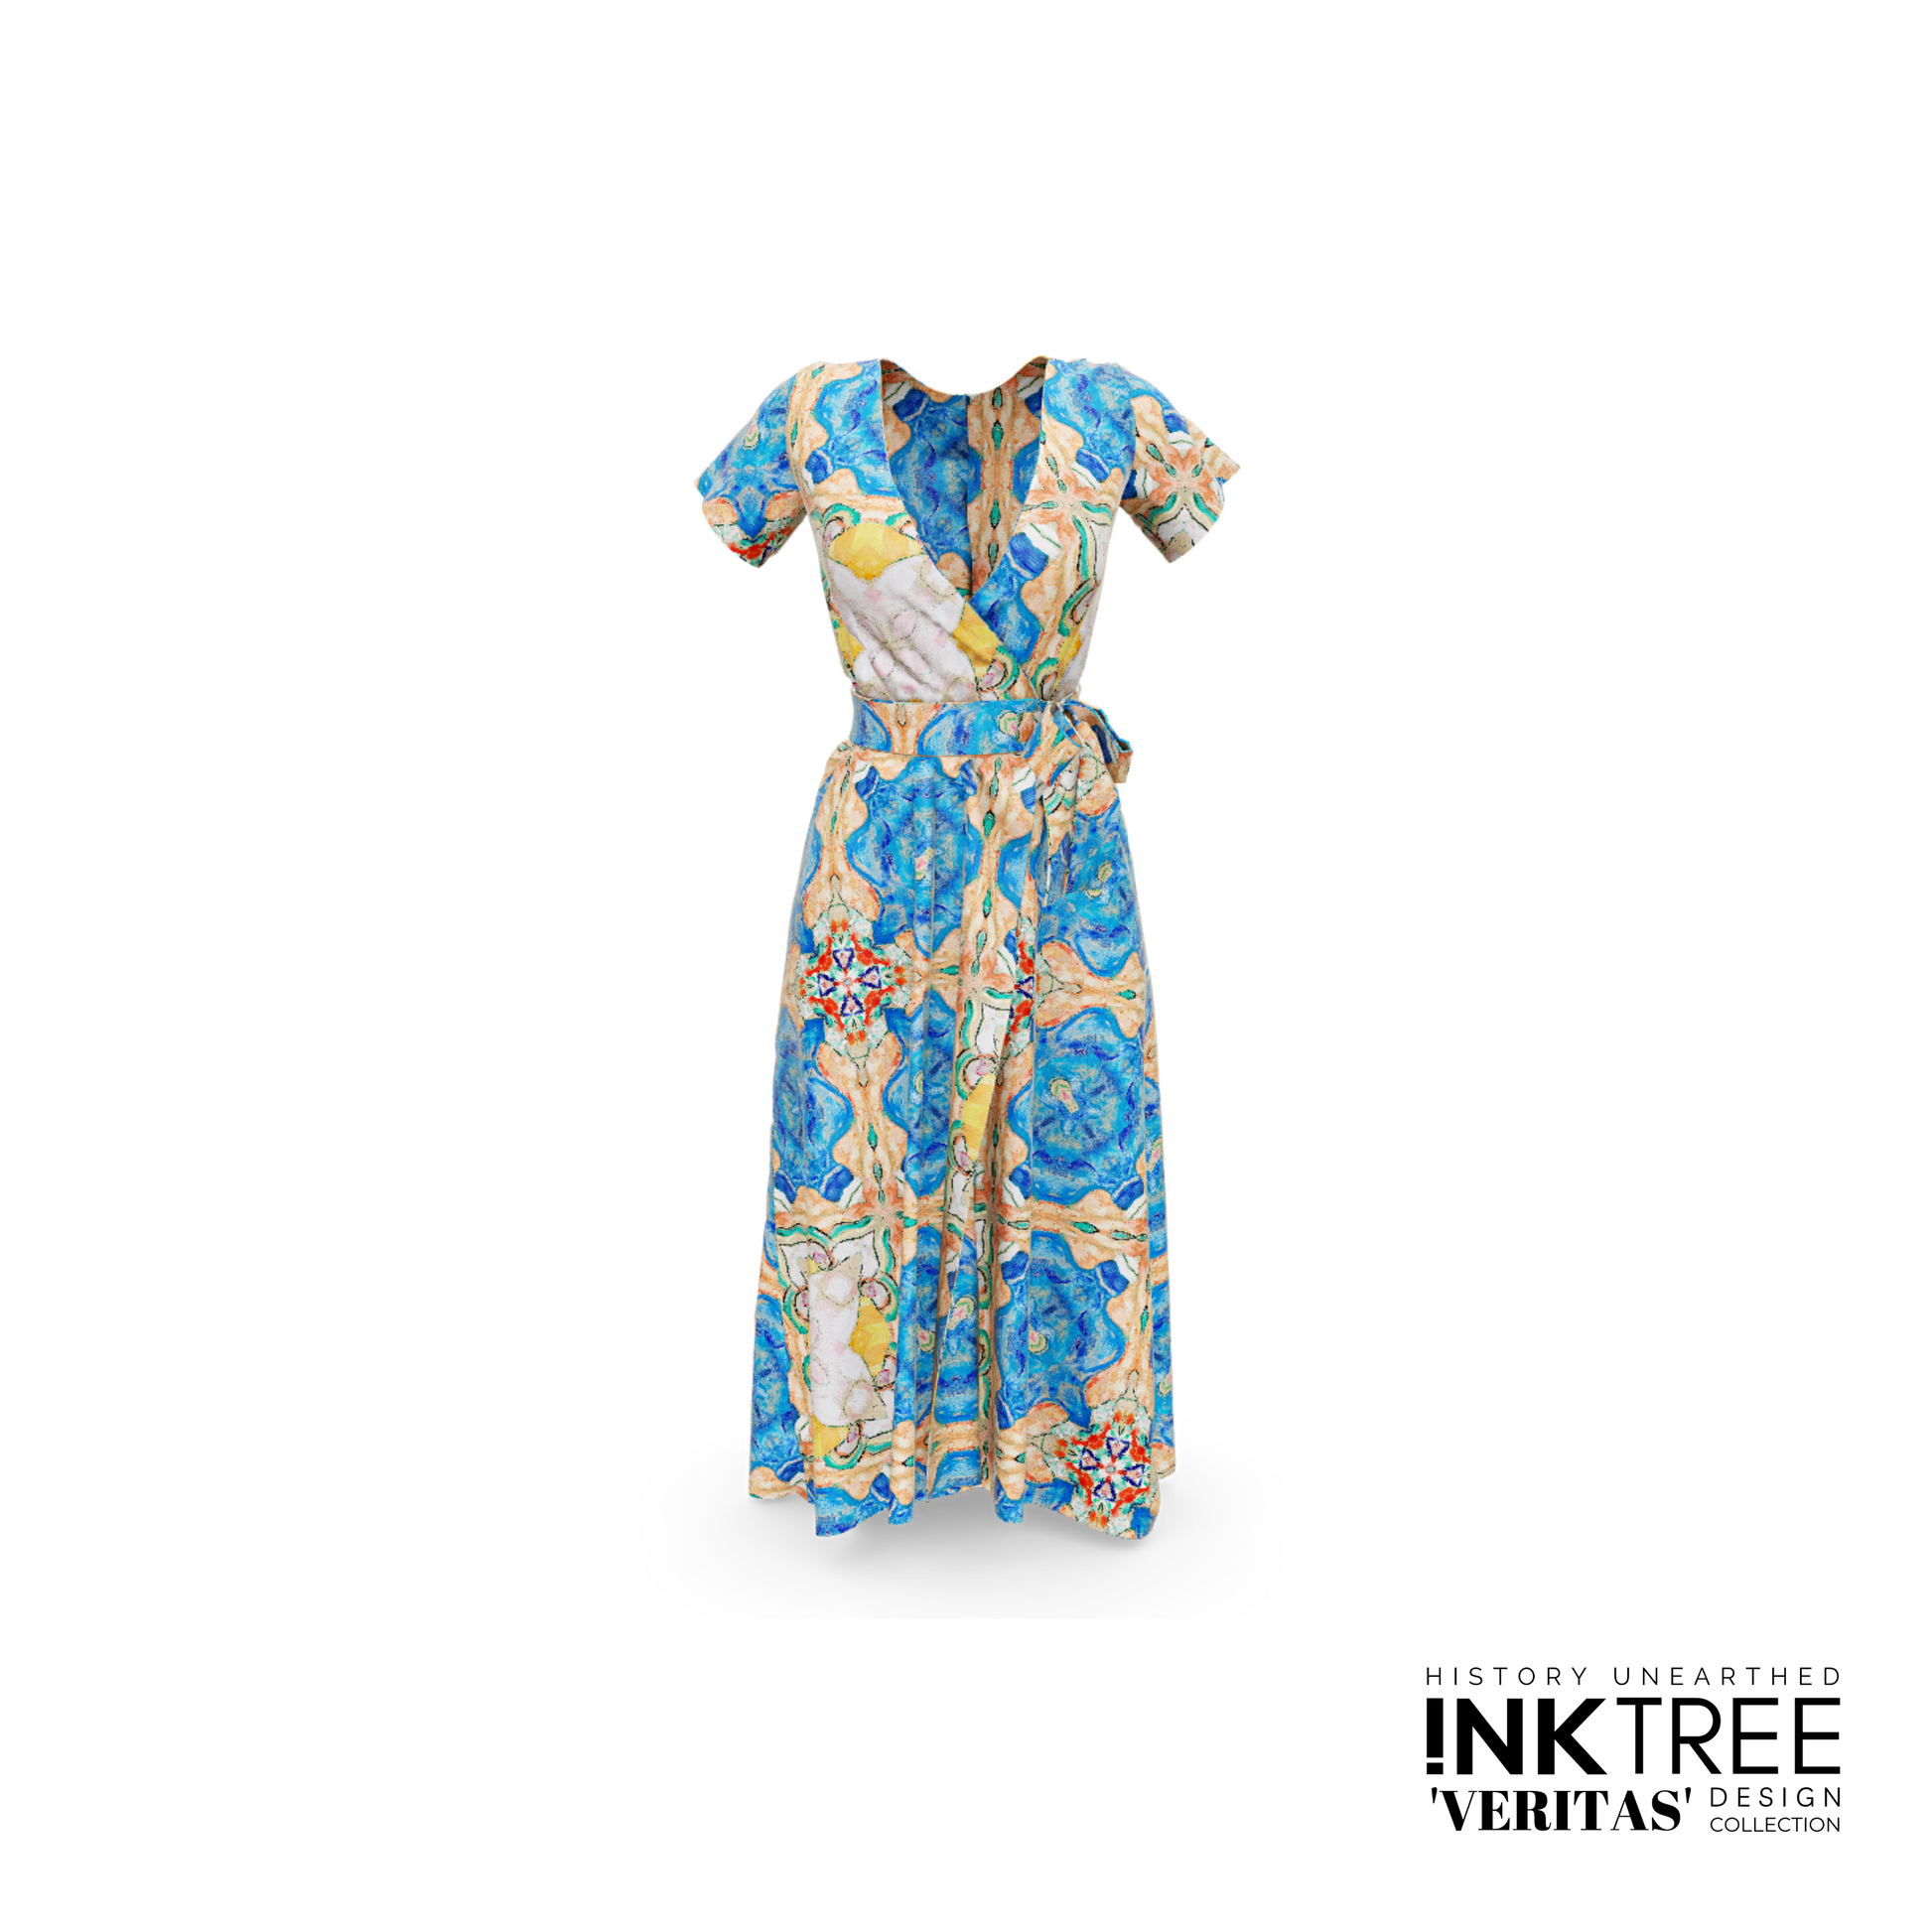 A dress on a white background with blue, yellow and reddish orange pattern.